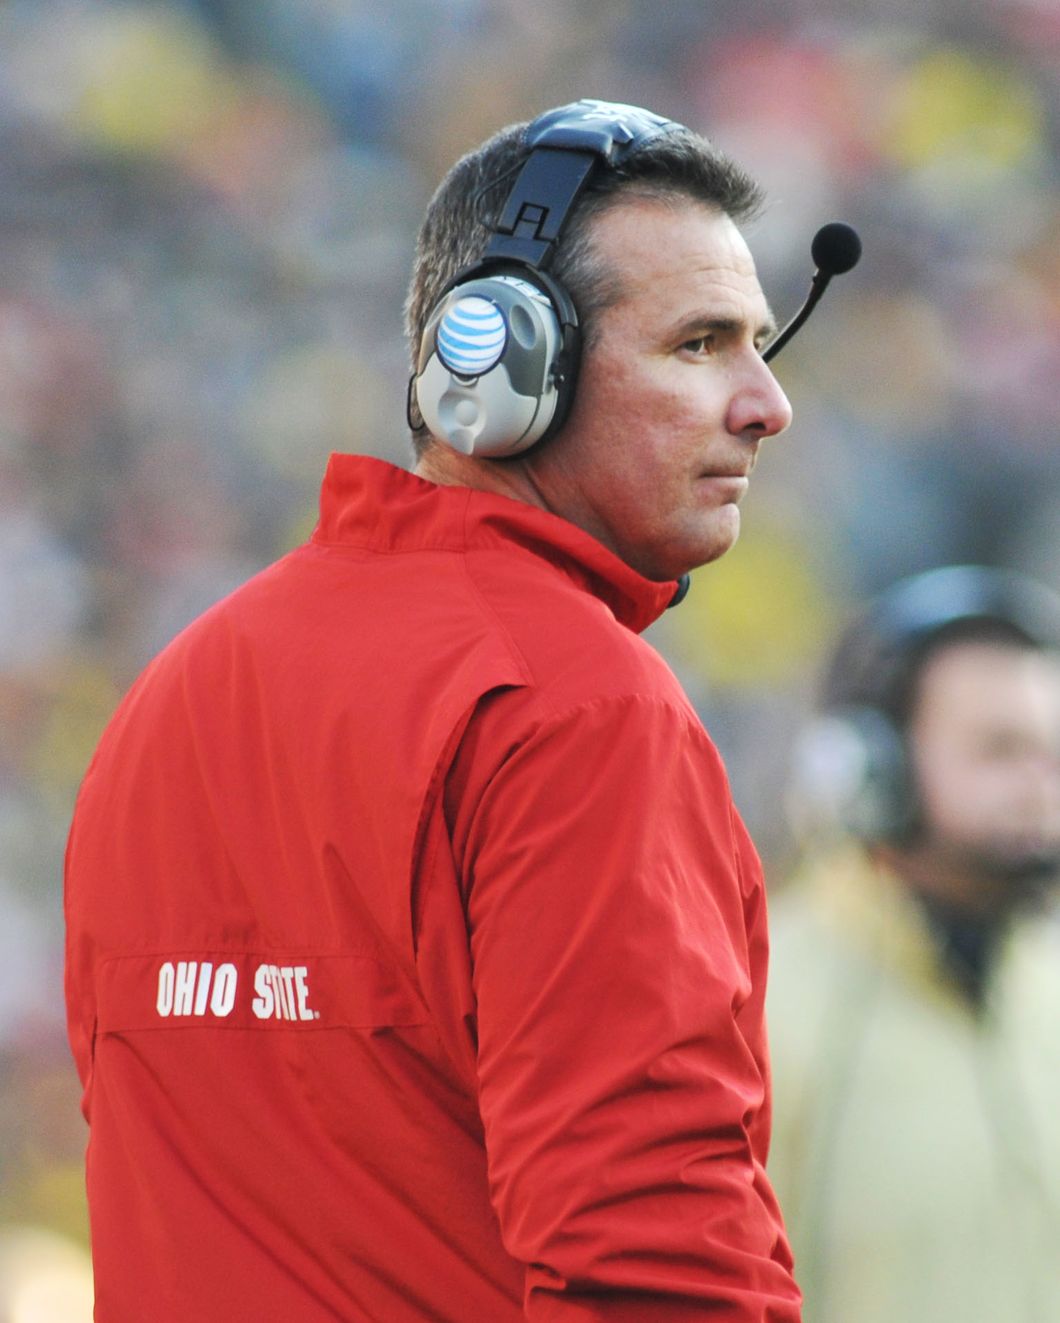 Urban Meyer Again Puts His Headset Down, But Is It For Good This Time?